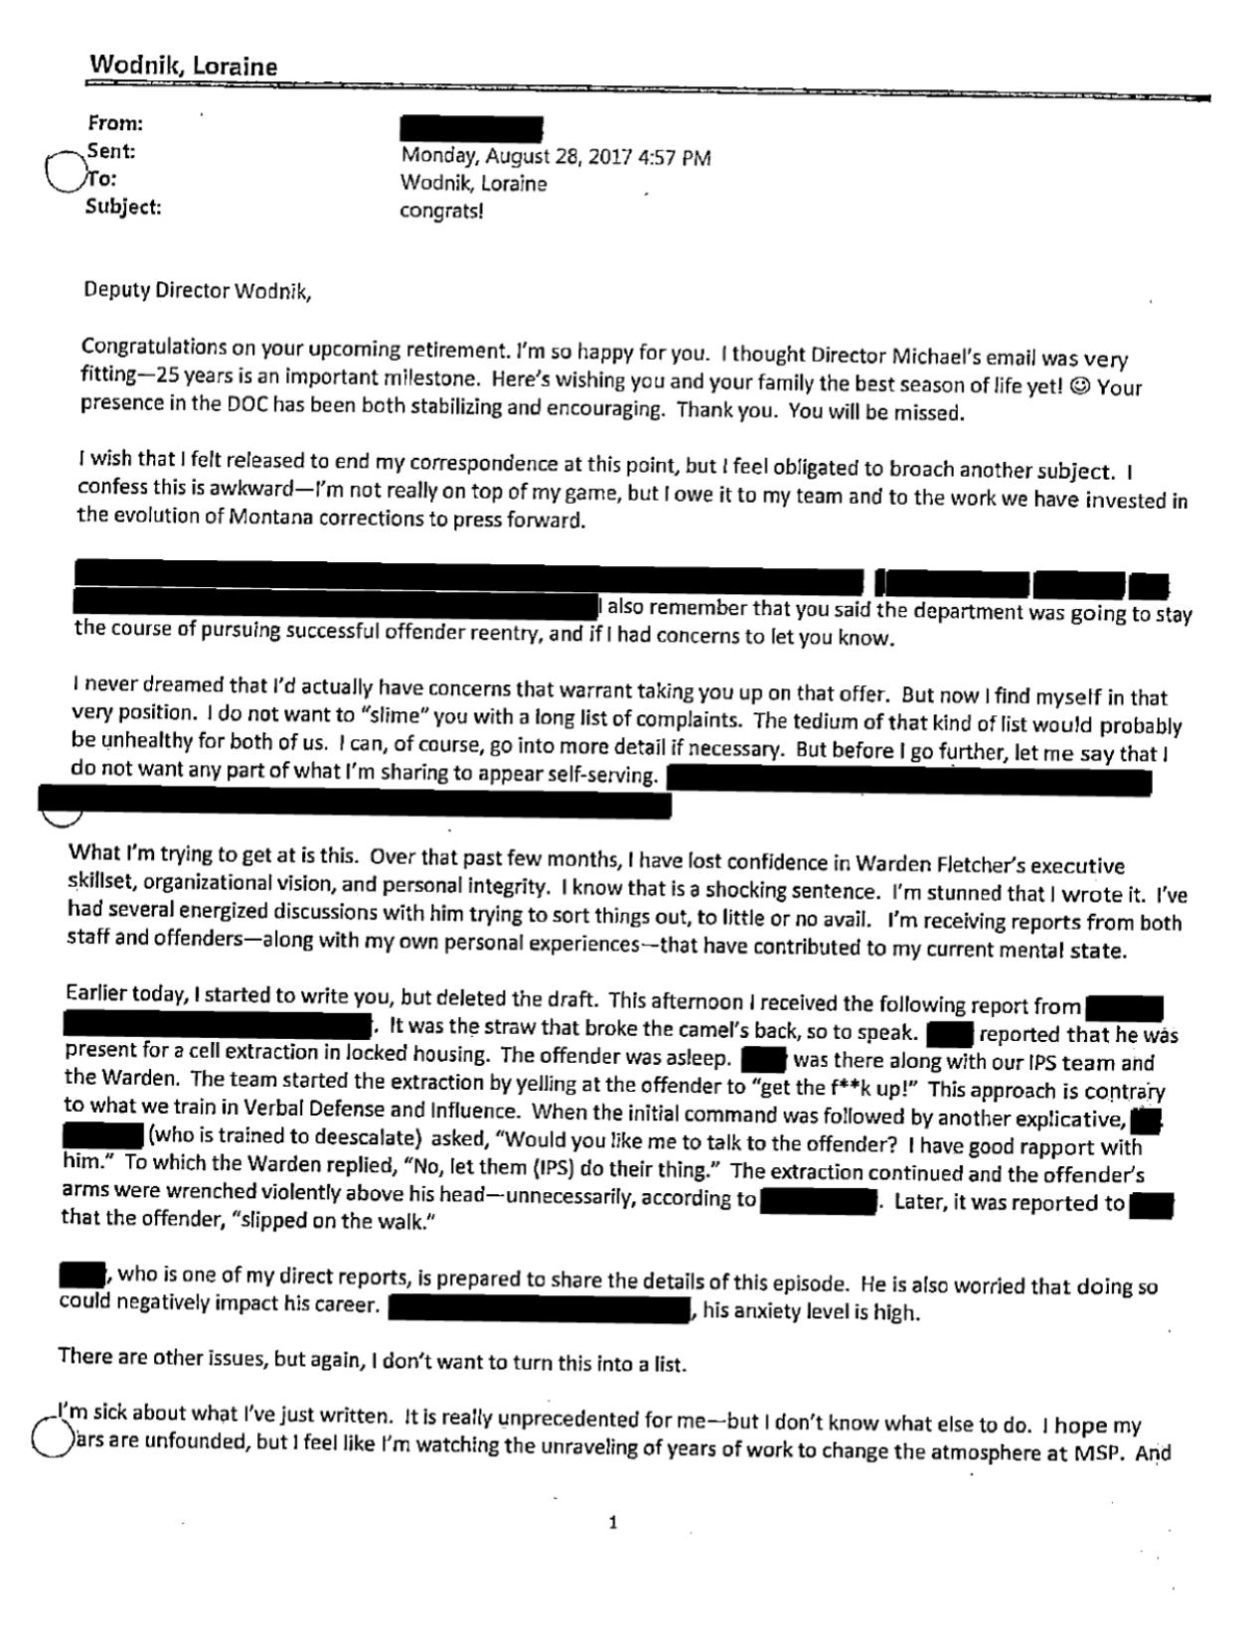 cezary podkul foia records redacted email